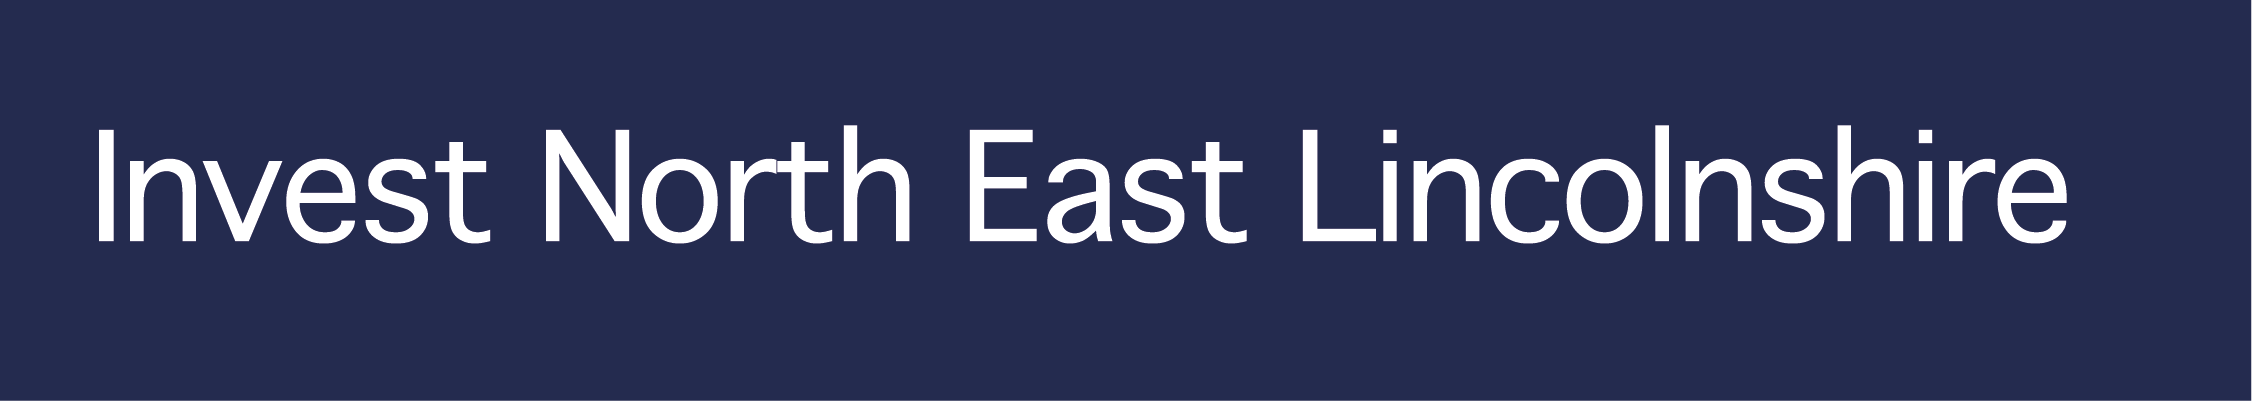 Invest North East Lincolnshire Logo